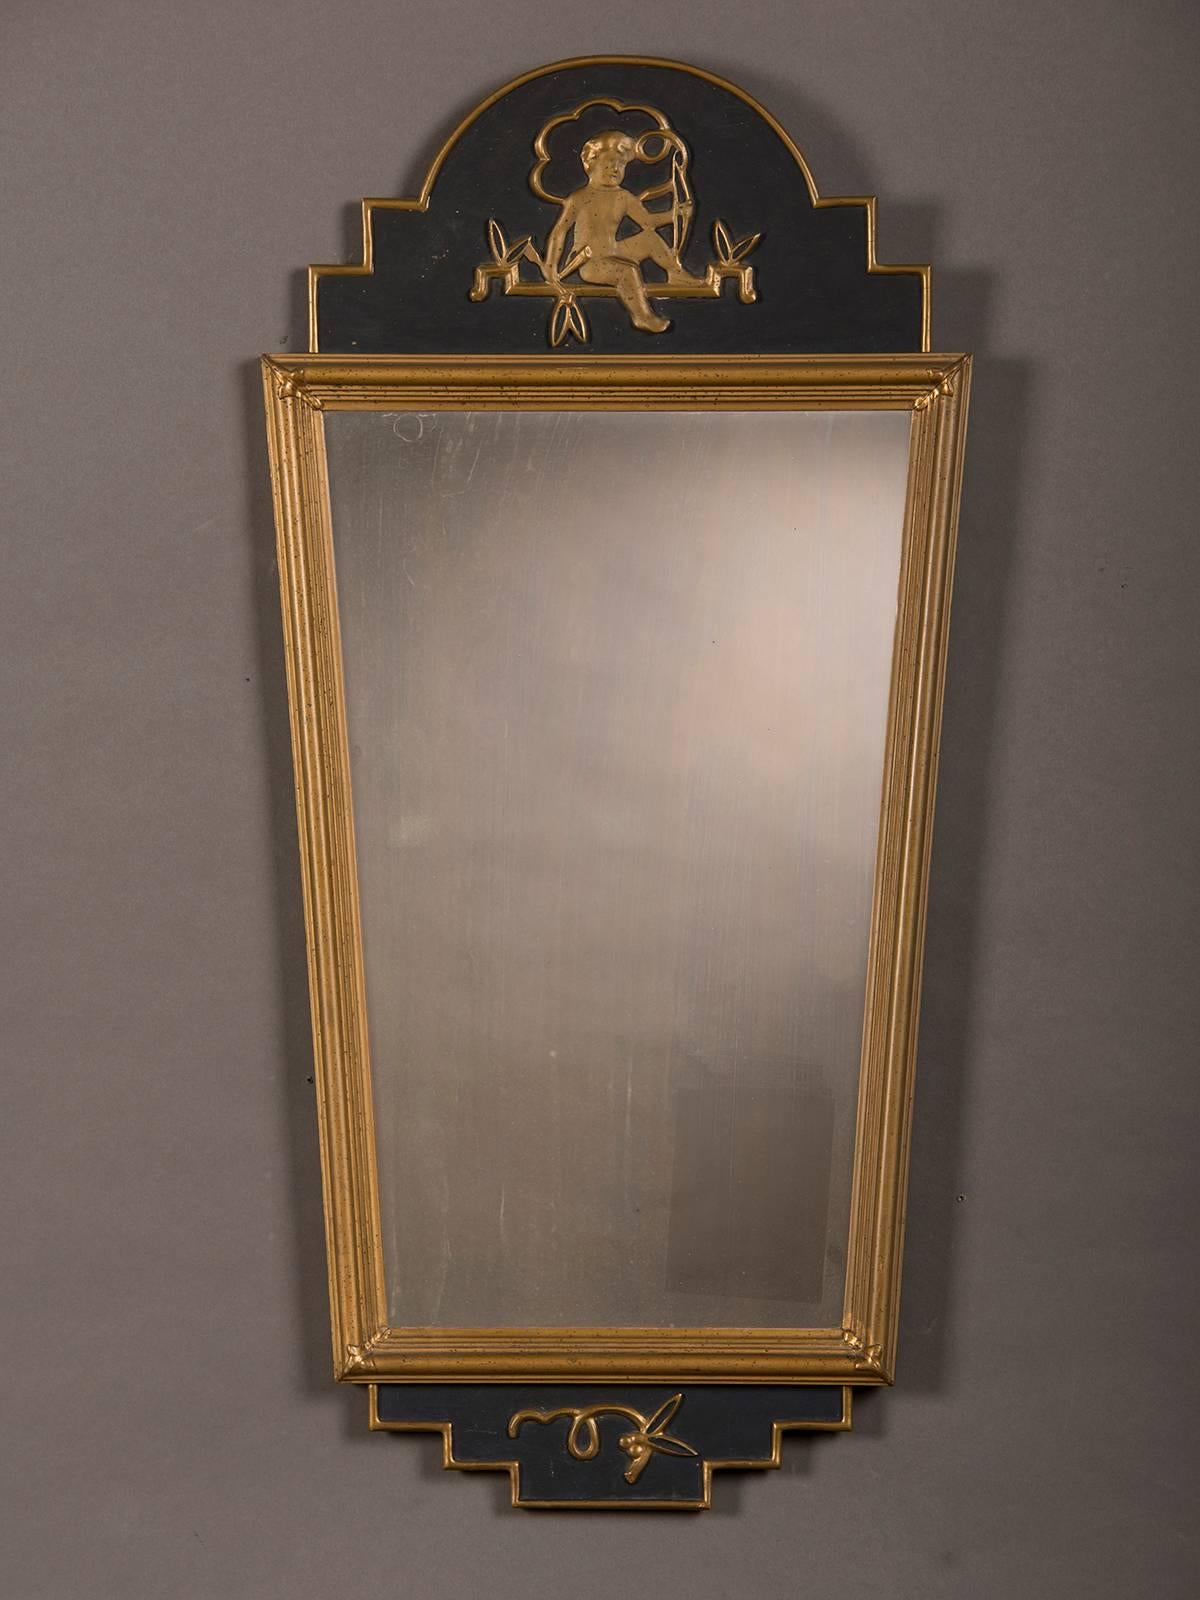 A neoclassical Swedish Gustavian Style painted frame enclosing the original mirror glass, circa 1890. The combination of the painted finish is offset with lovely gold leaf that highlights the charming putto seated at the top of the frame. The